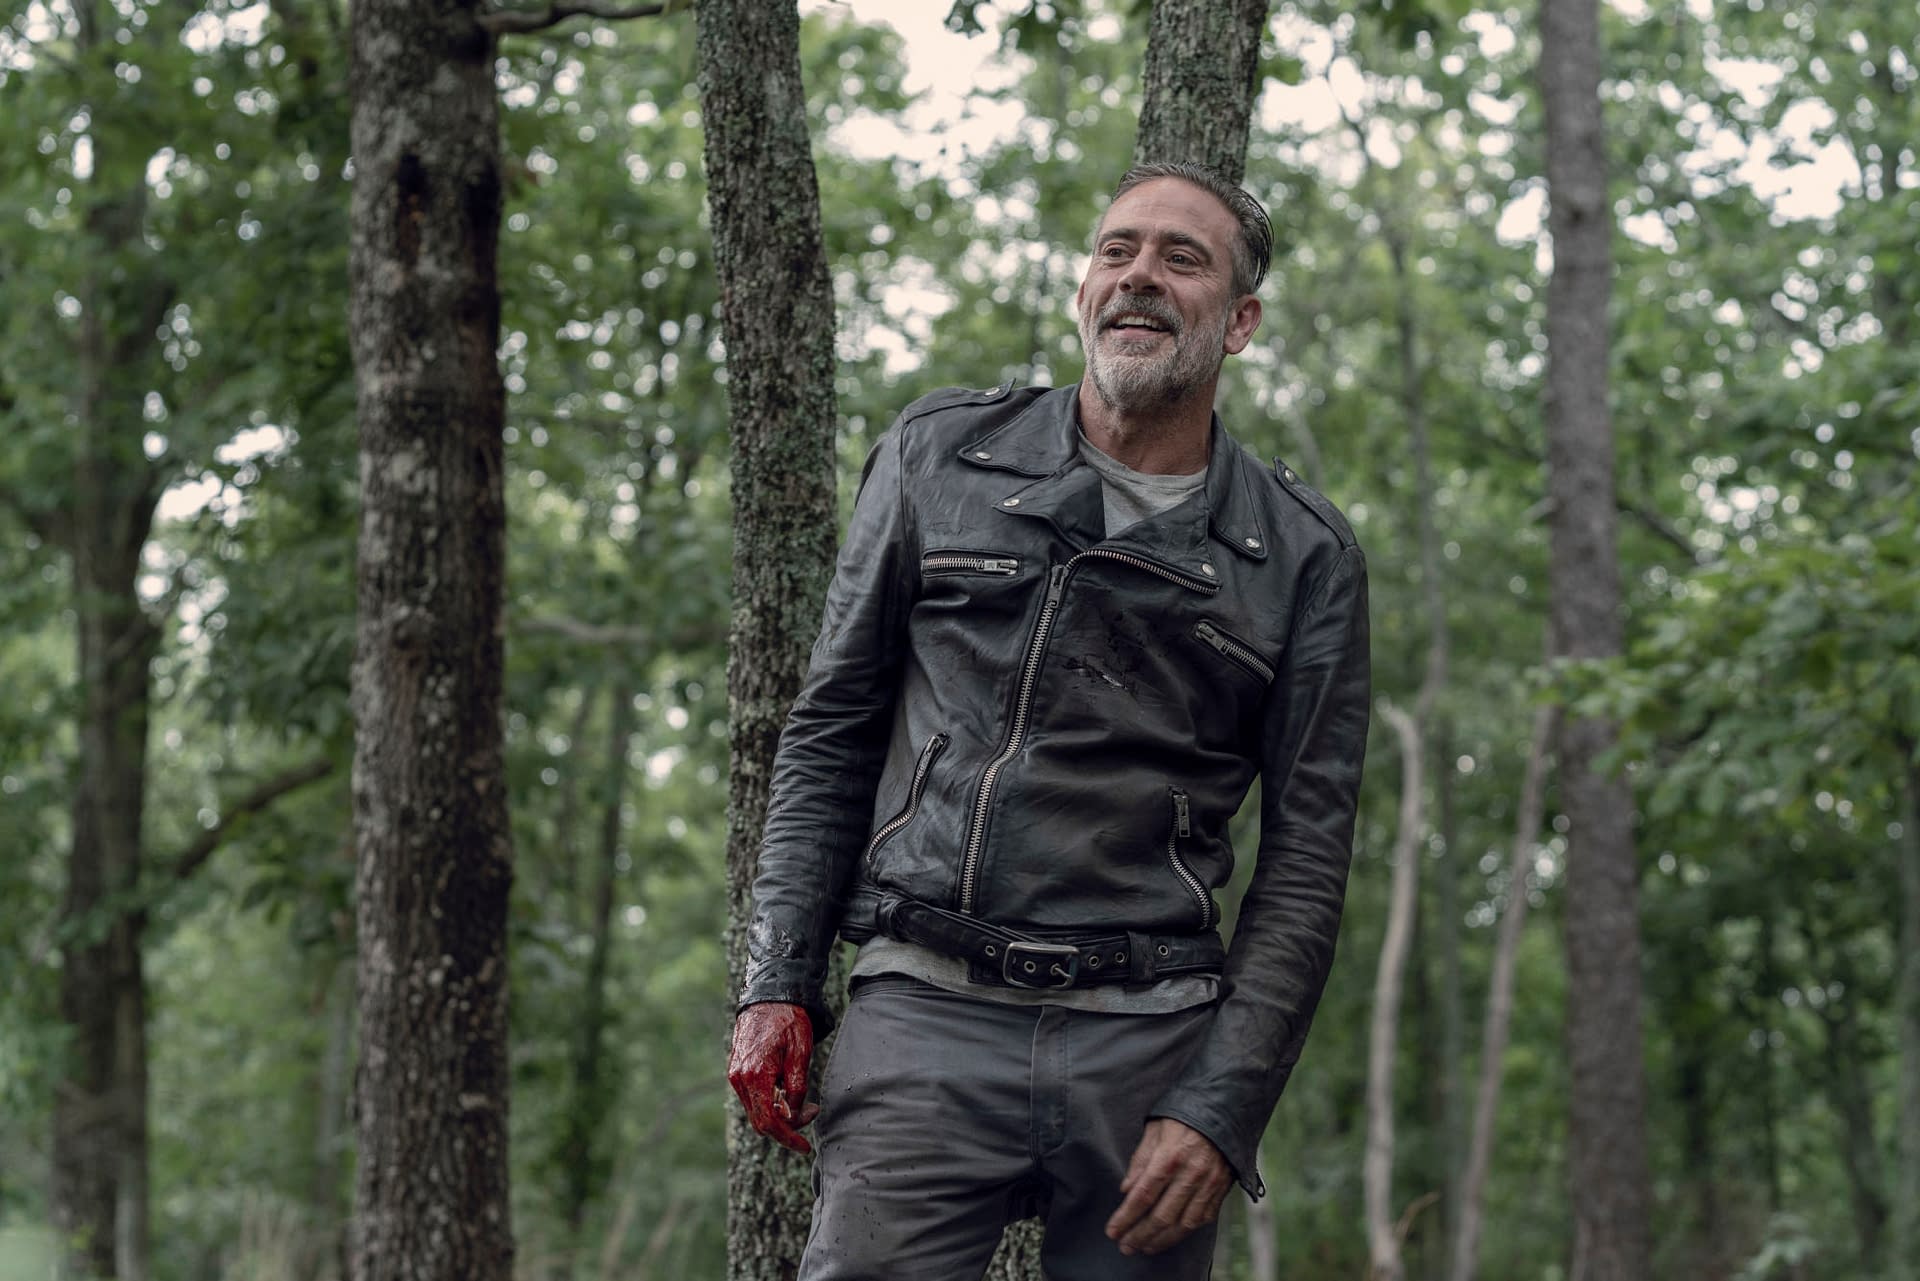 "The Walking Dead" Season 10: Yup, Those Were Exclusive Pics You Posted, Melissa McBride &#8211; Thanks! [PREVIEW]